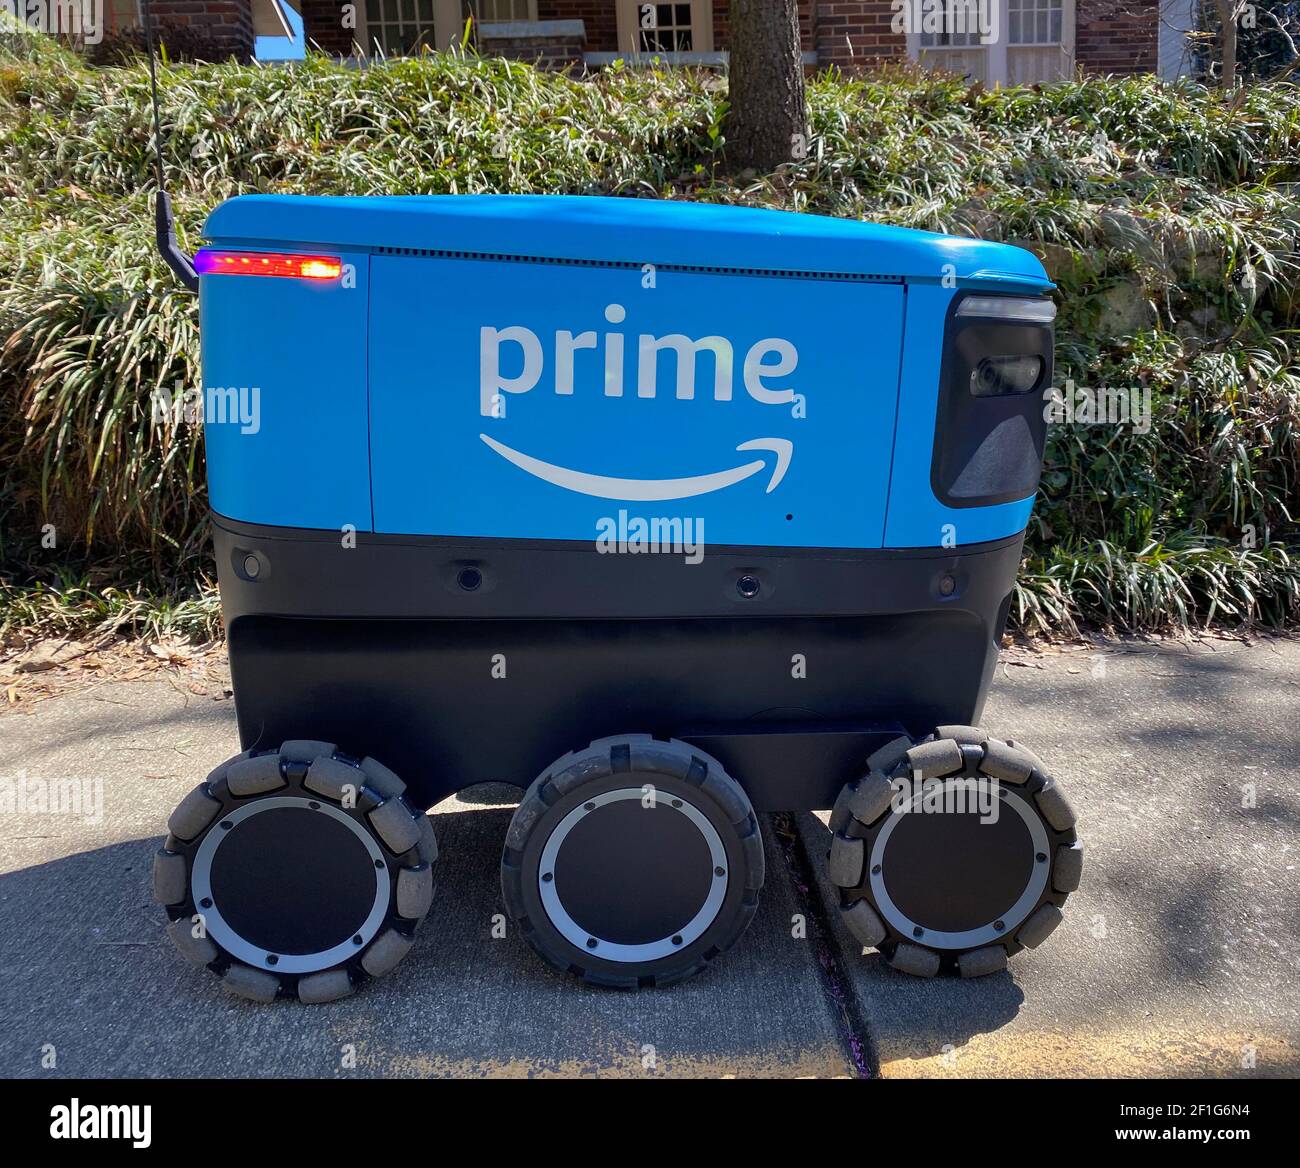 Atlanta Georgia Usa 8th Mar 21 An Amazon Scout Robotic Deliver Vehicle About The Size Of A Large Picnic Cooler Is Tested In A Residential Neighborhood Of The Midtown Section